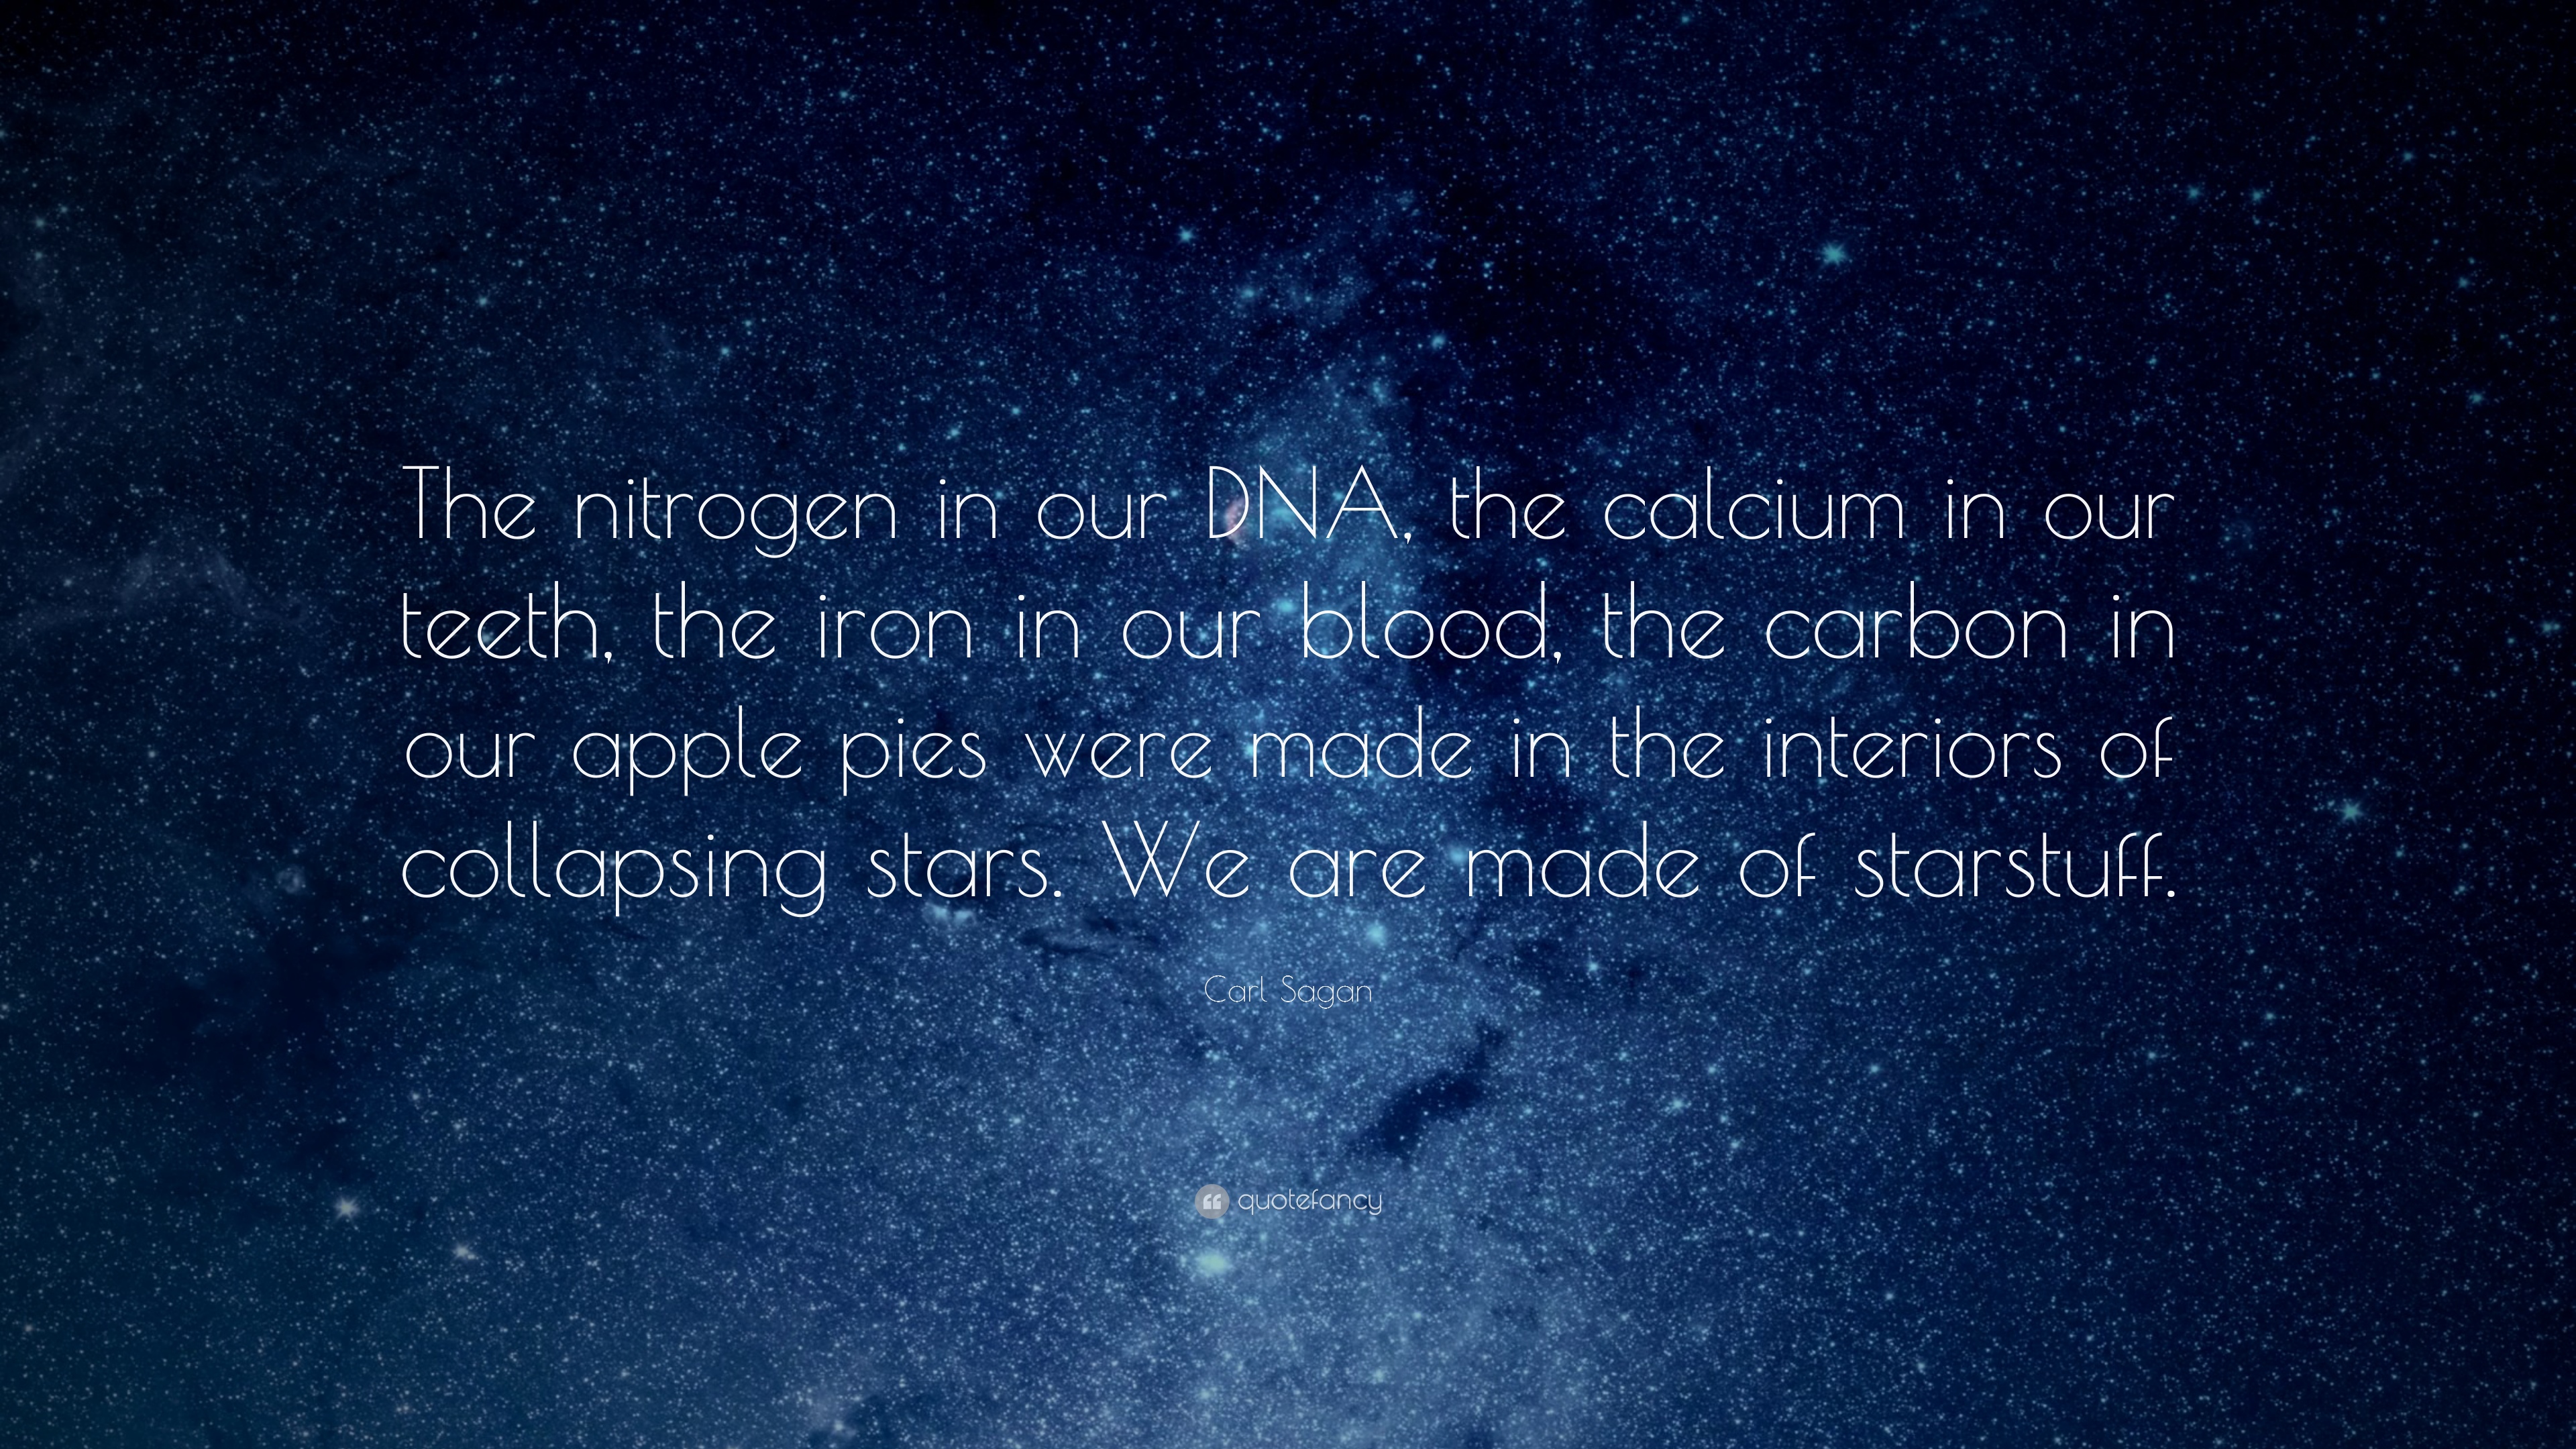 The nitrogen in our DNA, the calcium in our teeth, the iron in our blood, the carbon in our apple pies were made in the interiors of collapsing stars. We are made of starstuff.